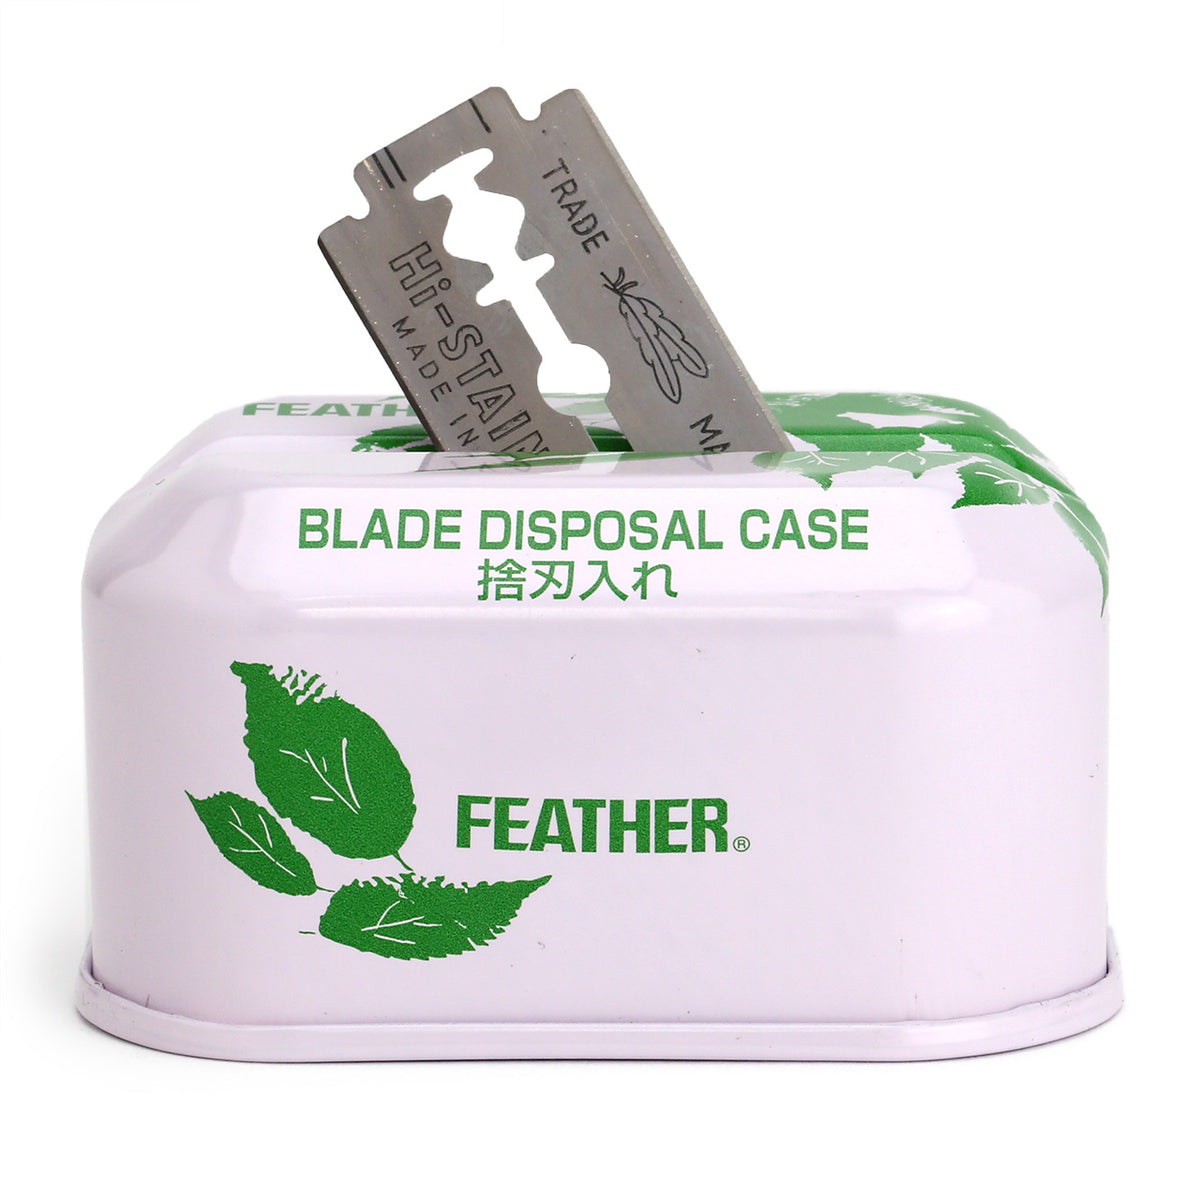 Feather blade bank disposal case, showing blade for reference